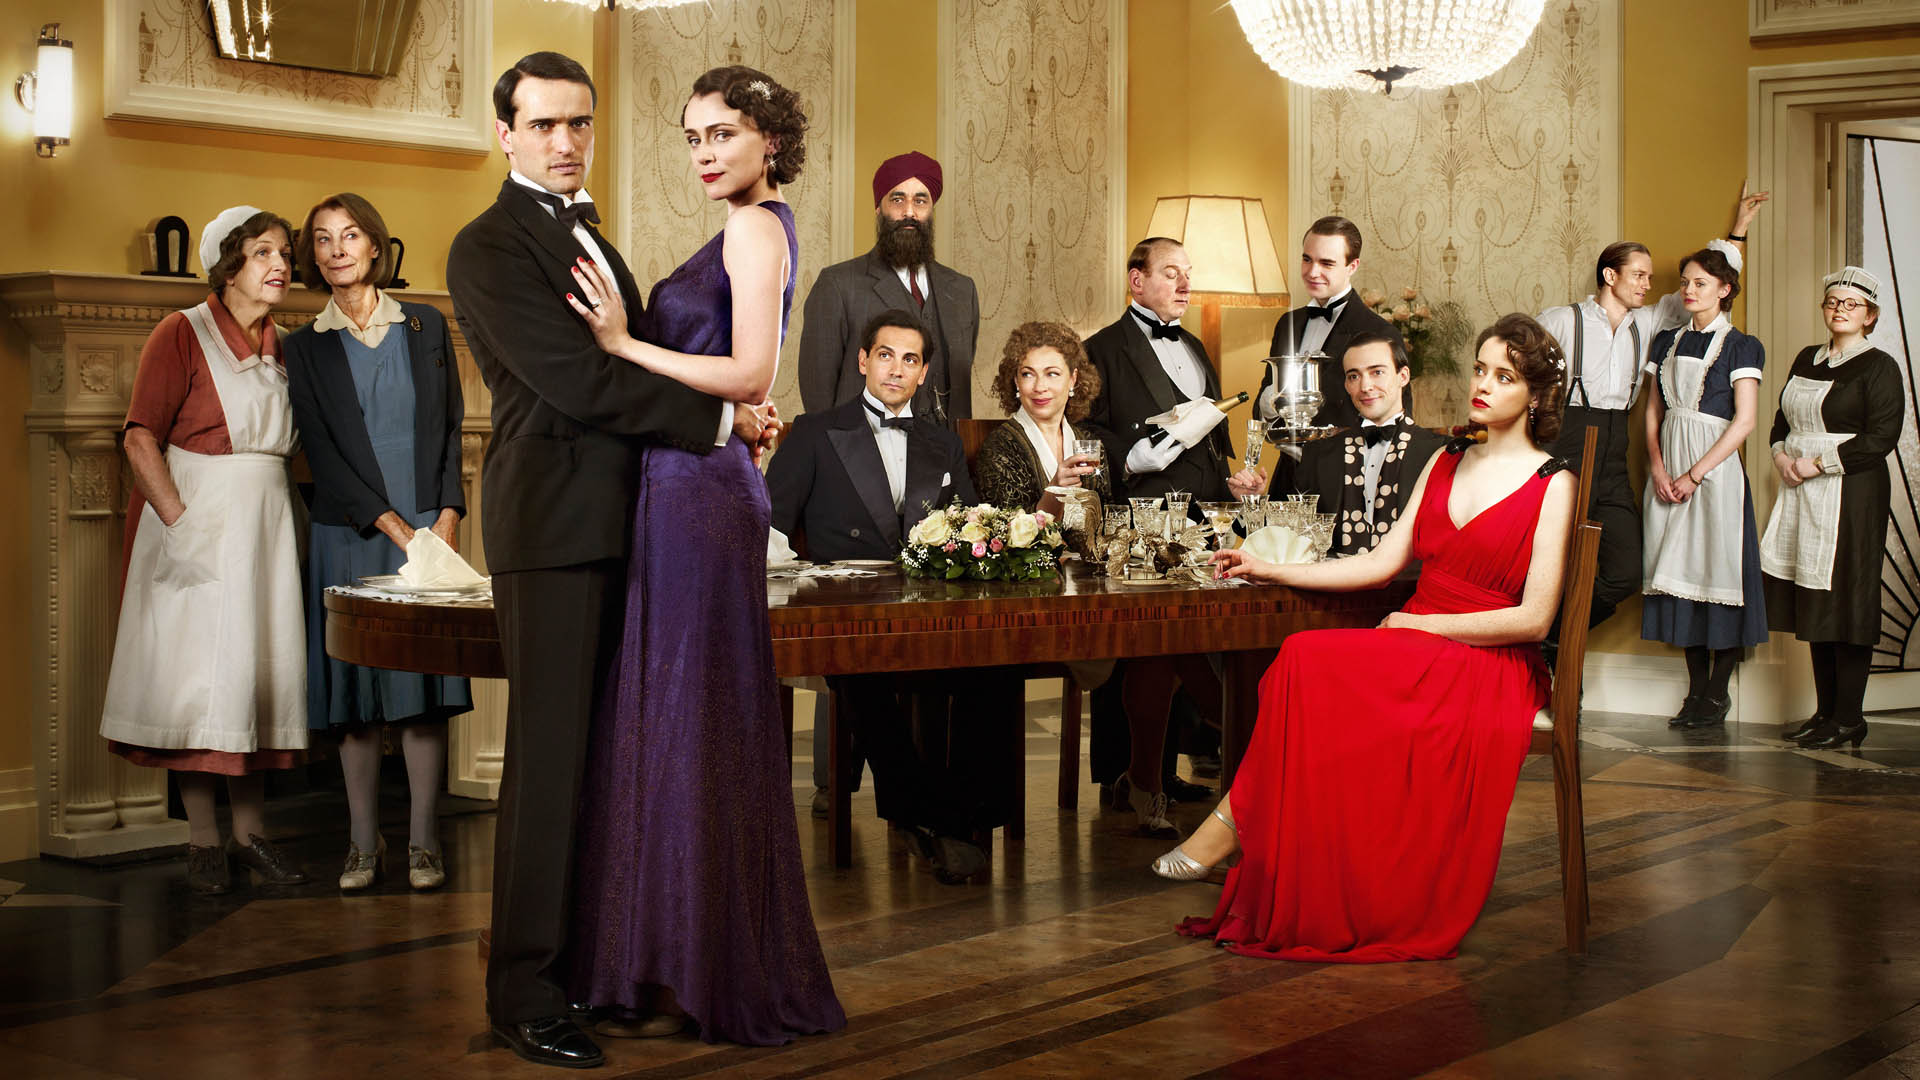 Upstairs Downstairs episodes (TV Series 2010 - 2013)